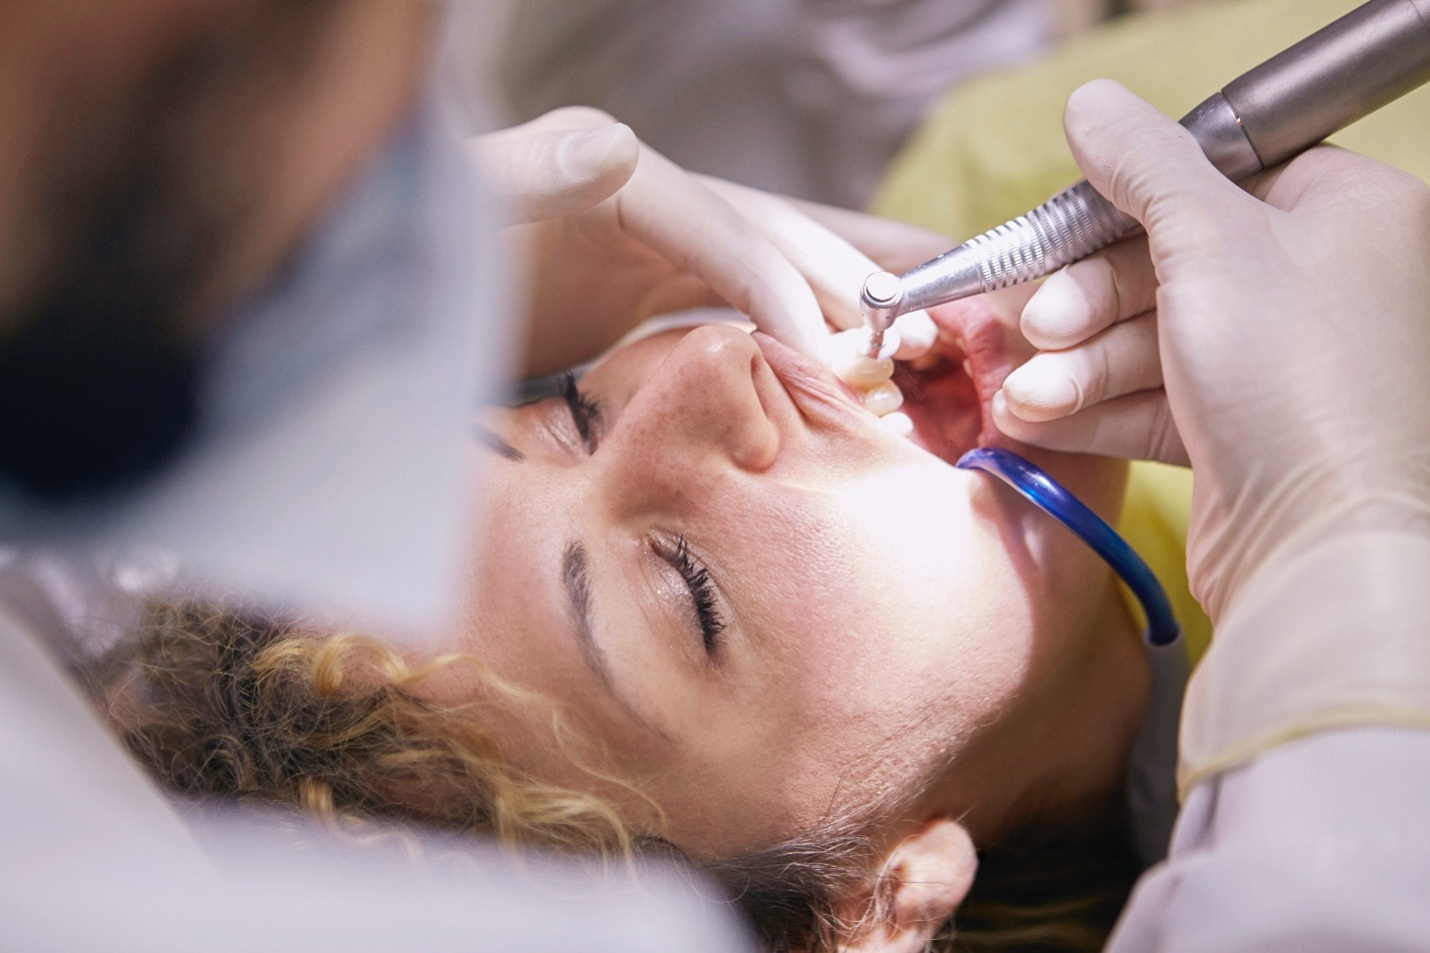 A woman getting a dental cleaning procedure done by a dentist